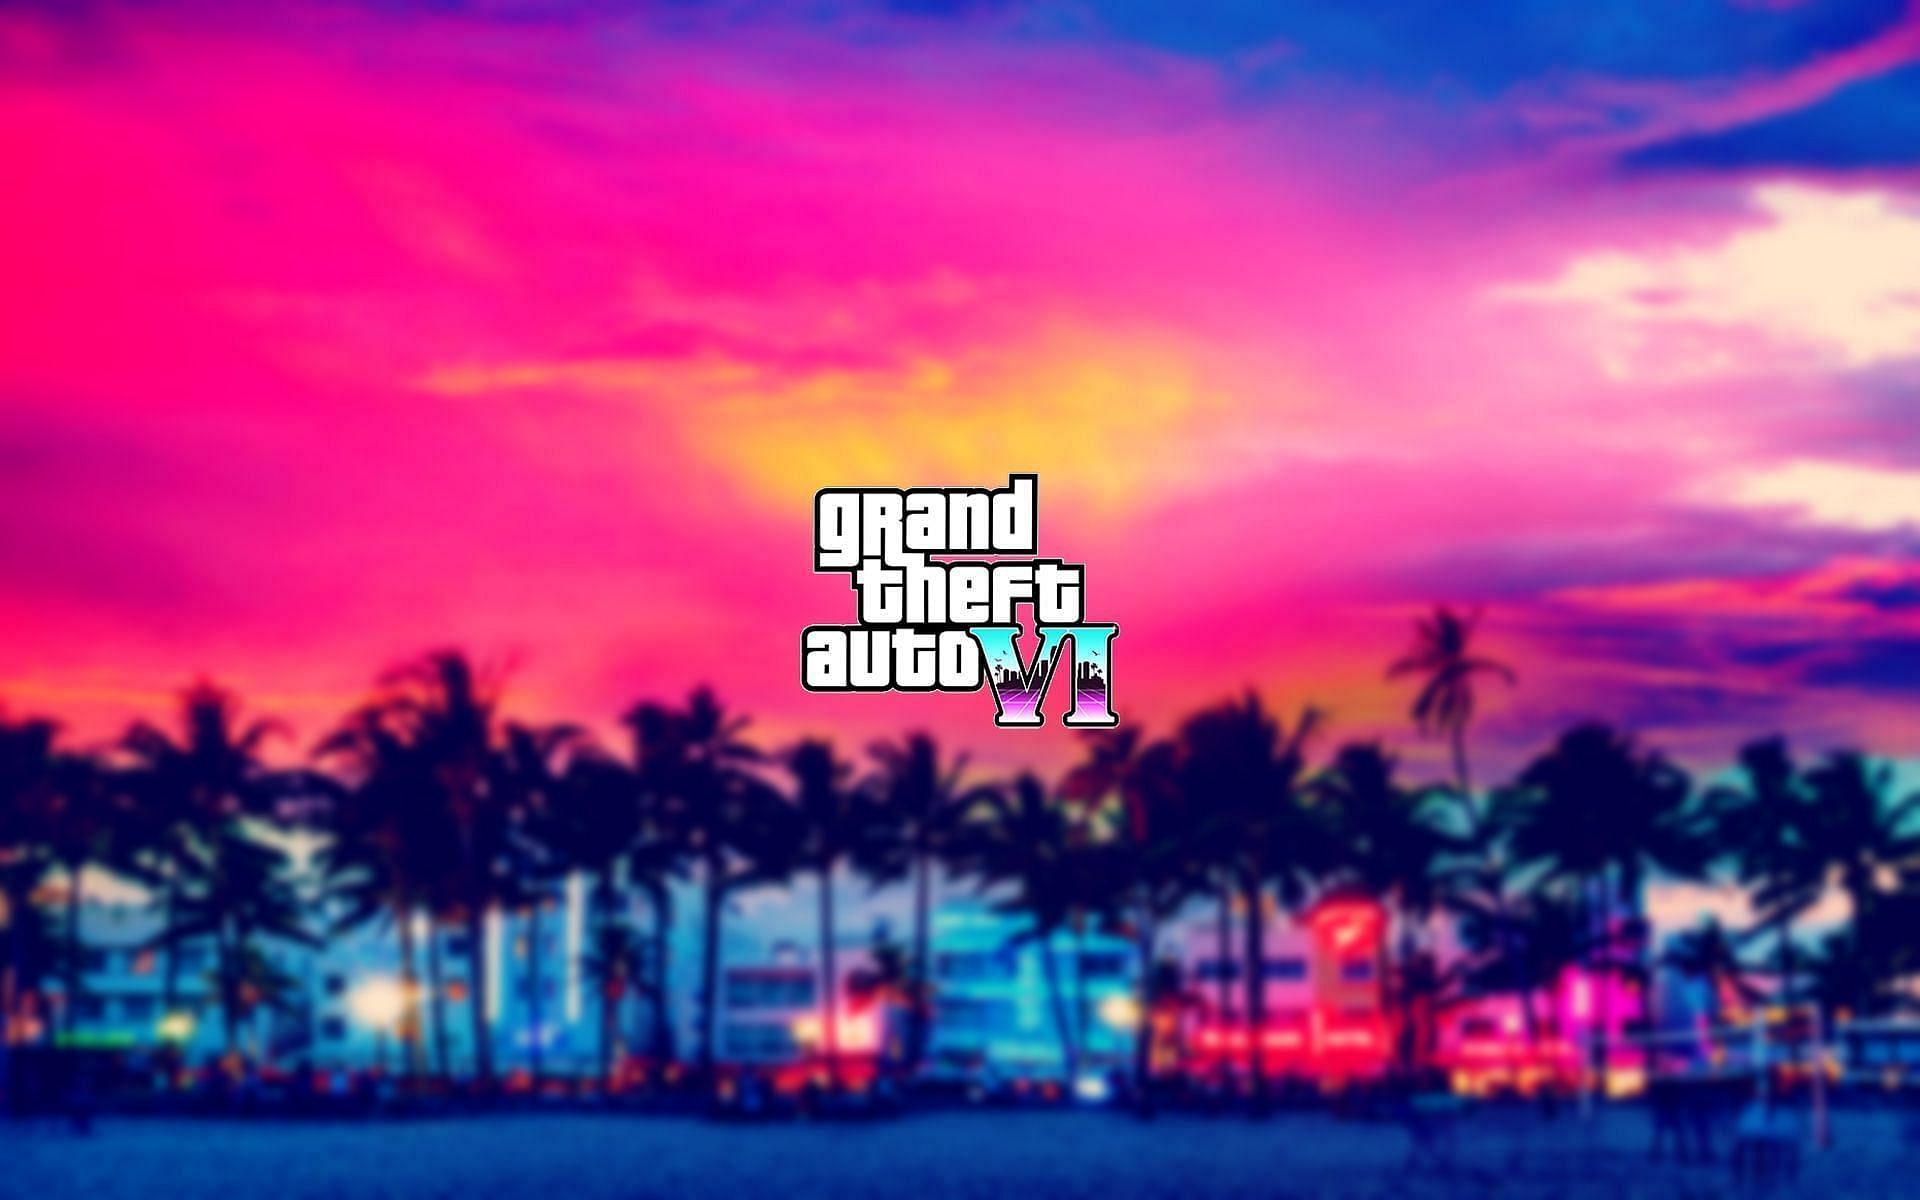 Fans believe GTA 6 could be revealed by the end of 2023 (Image via Sportskeeda)